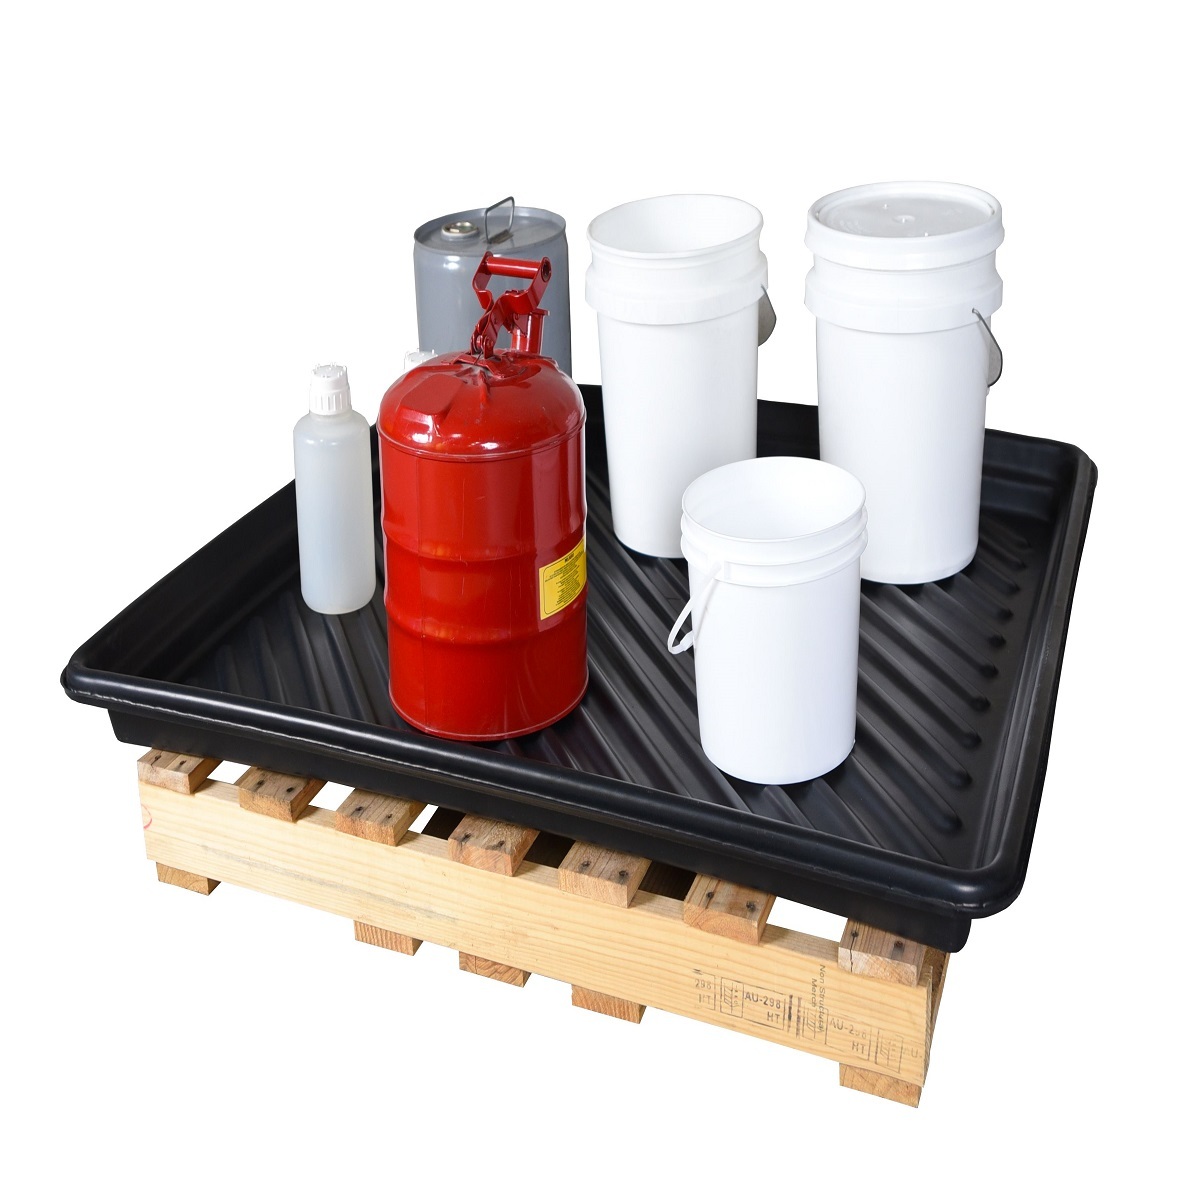 UltraTech Large Plastic Utility Spill Tray, 24 x 36